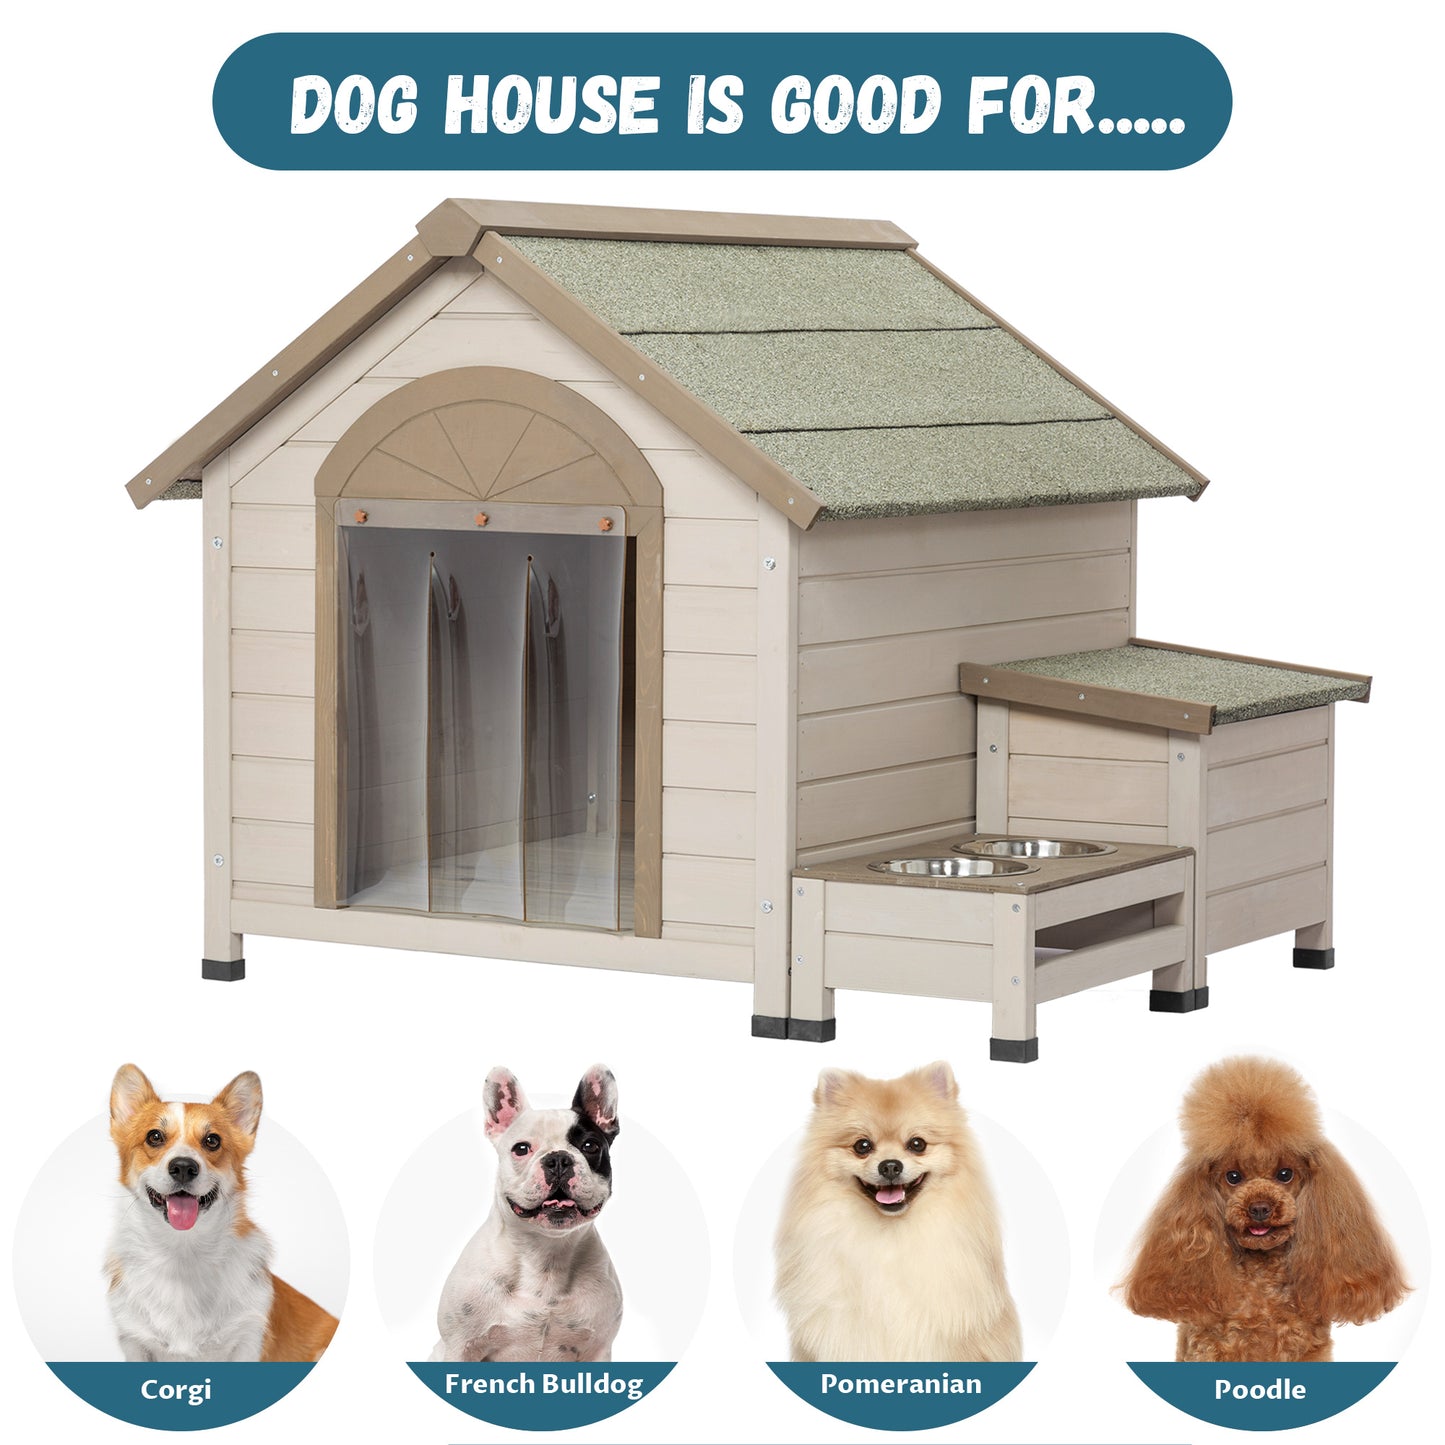 Outdoor fir wood dog house with an open roof ideal for small to medium dogs. With storage box, elevated feeding station with 2 bowls. Weatherproof asphalt roof and treated wood.